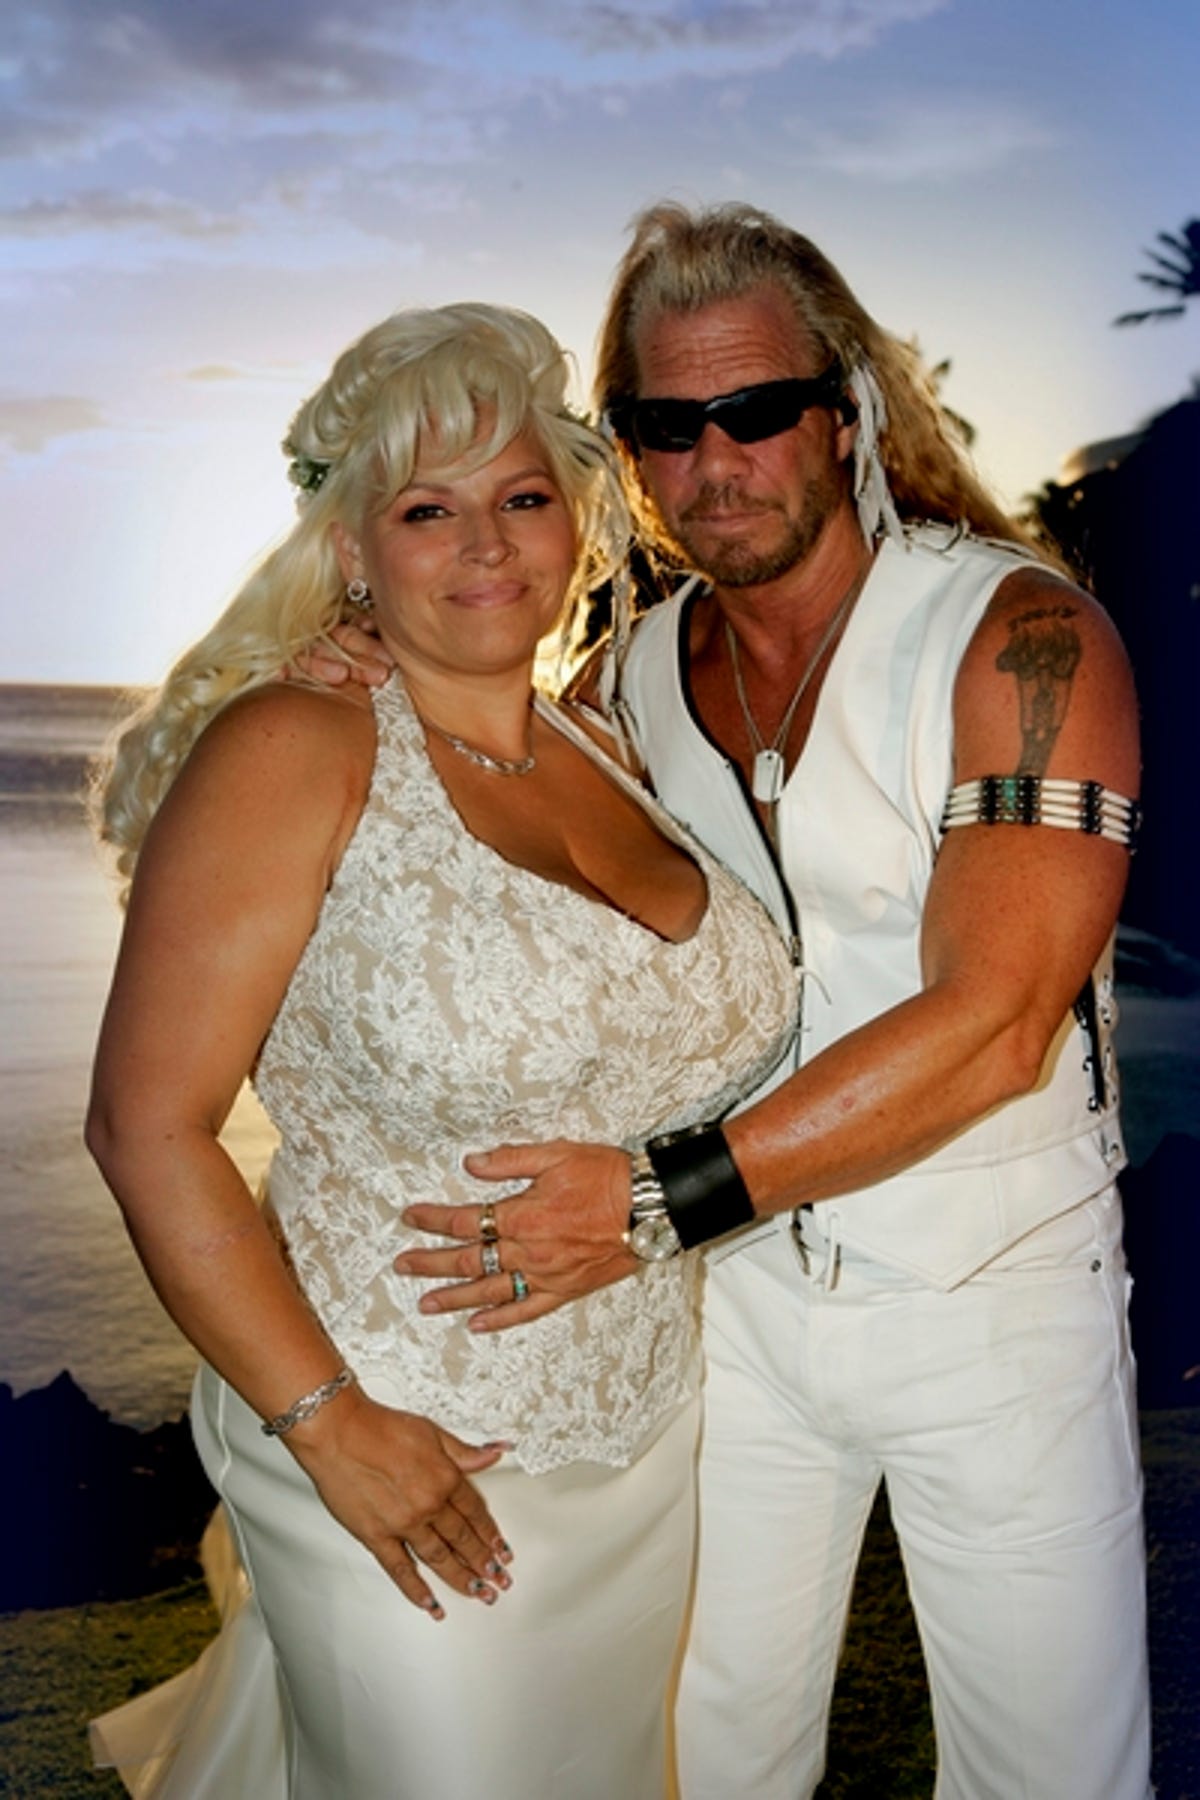 doug leitch recommends Beth Chapman Nude Pictures